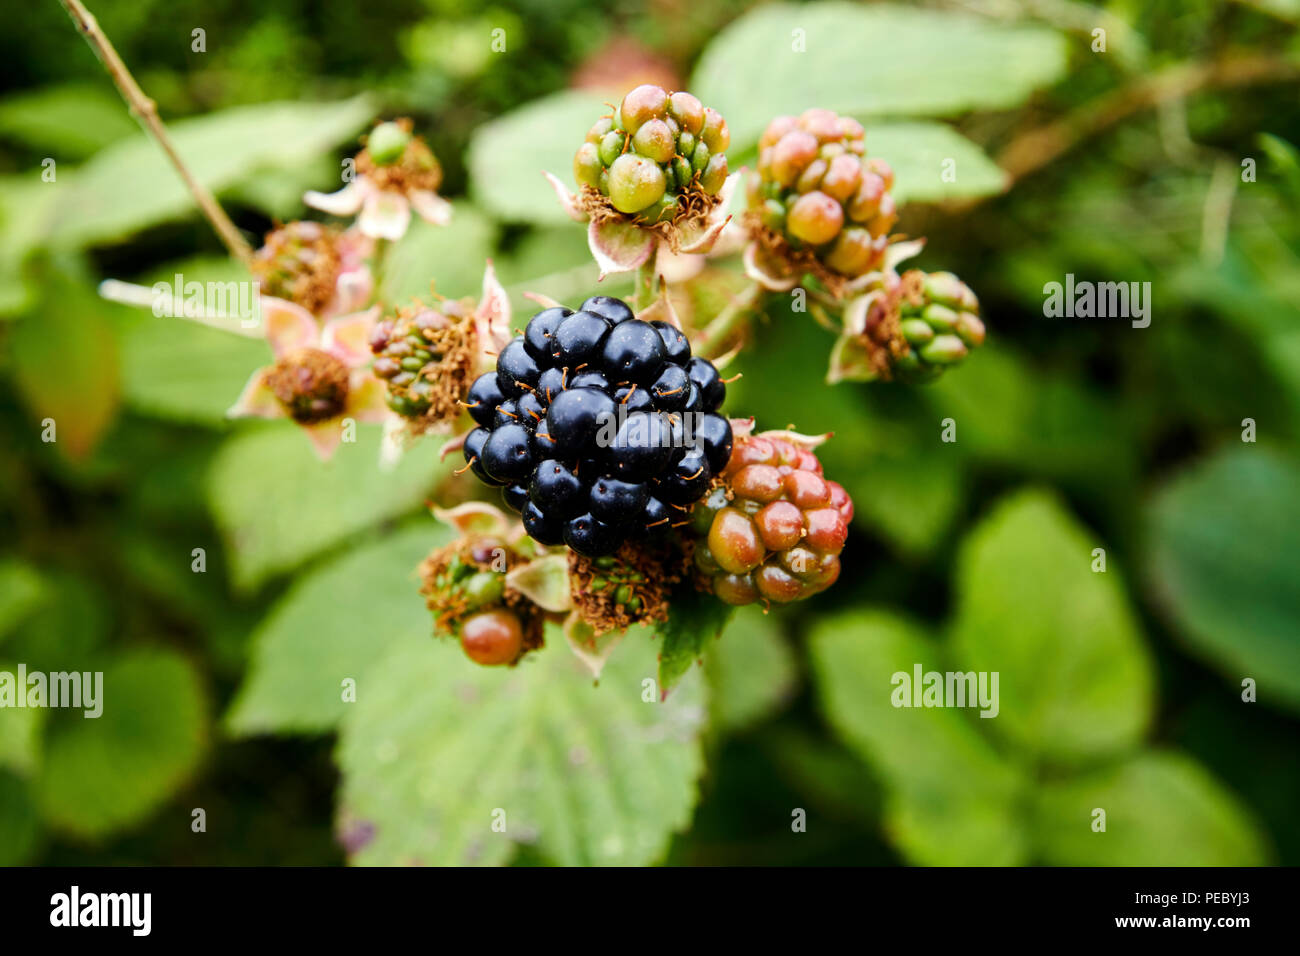 ripe and unripe blackberries growing in a hedgerow in ireland Stock Photo